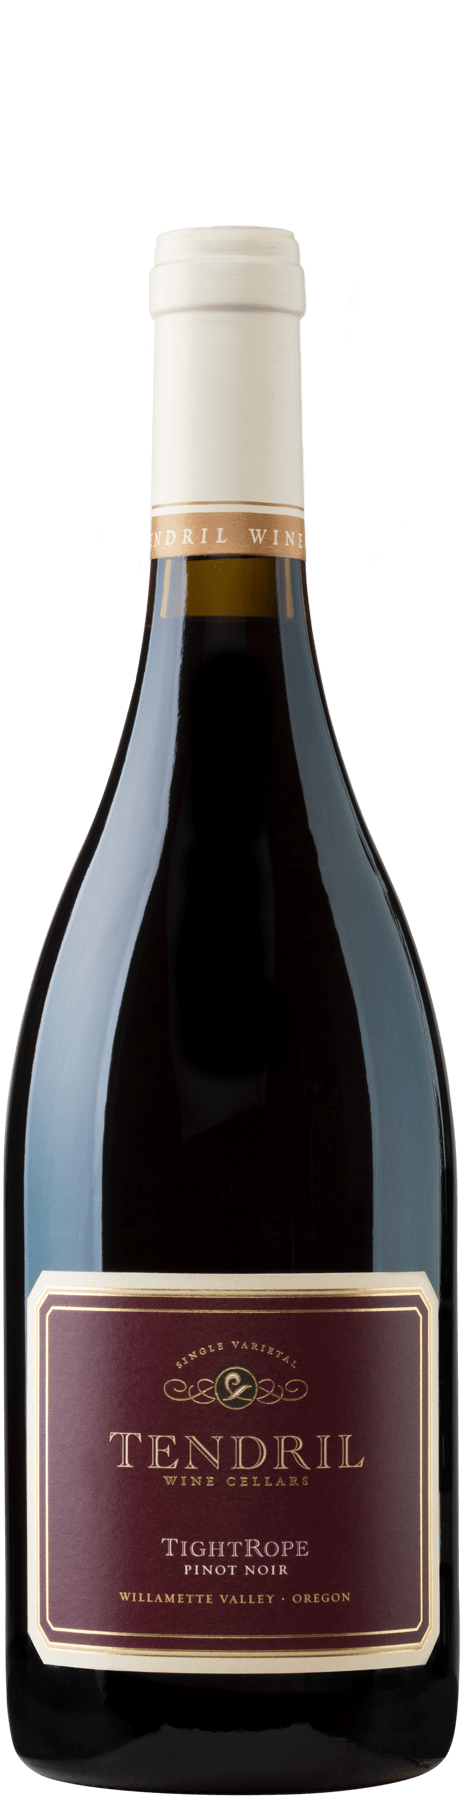 Tendril TightRope Pinot Noir